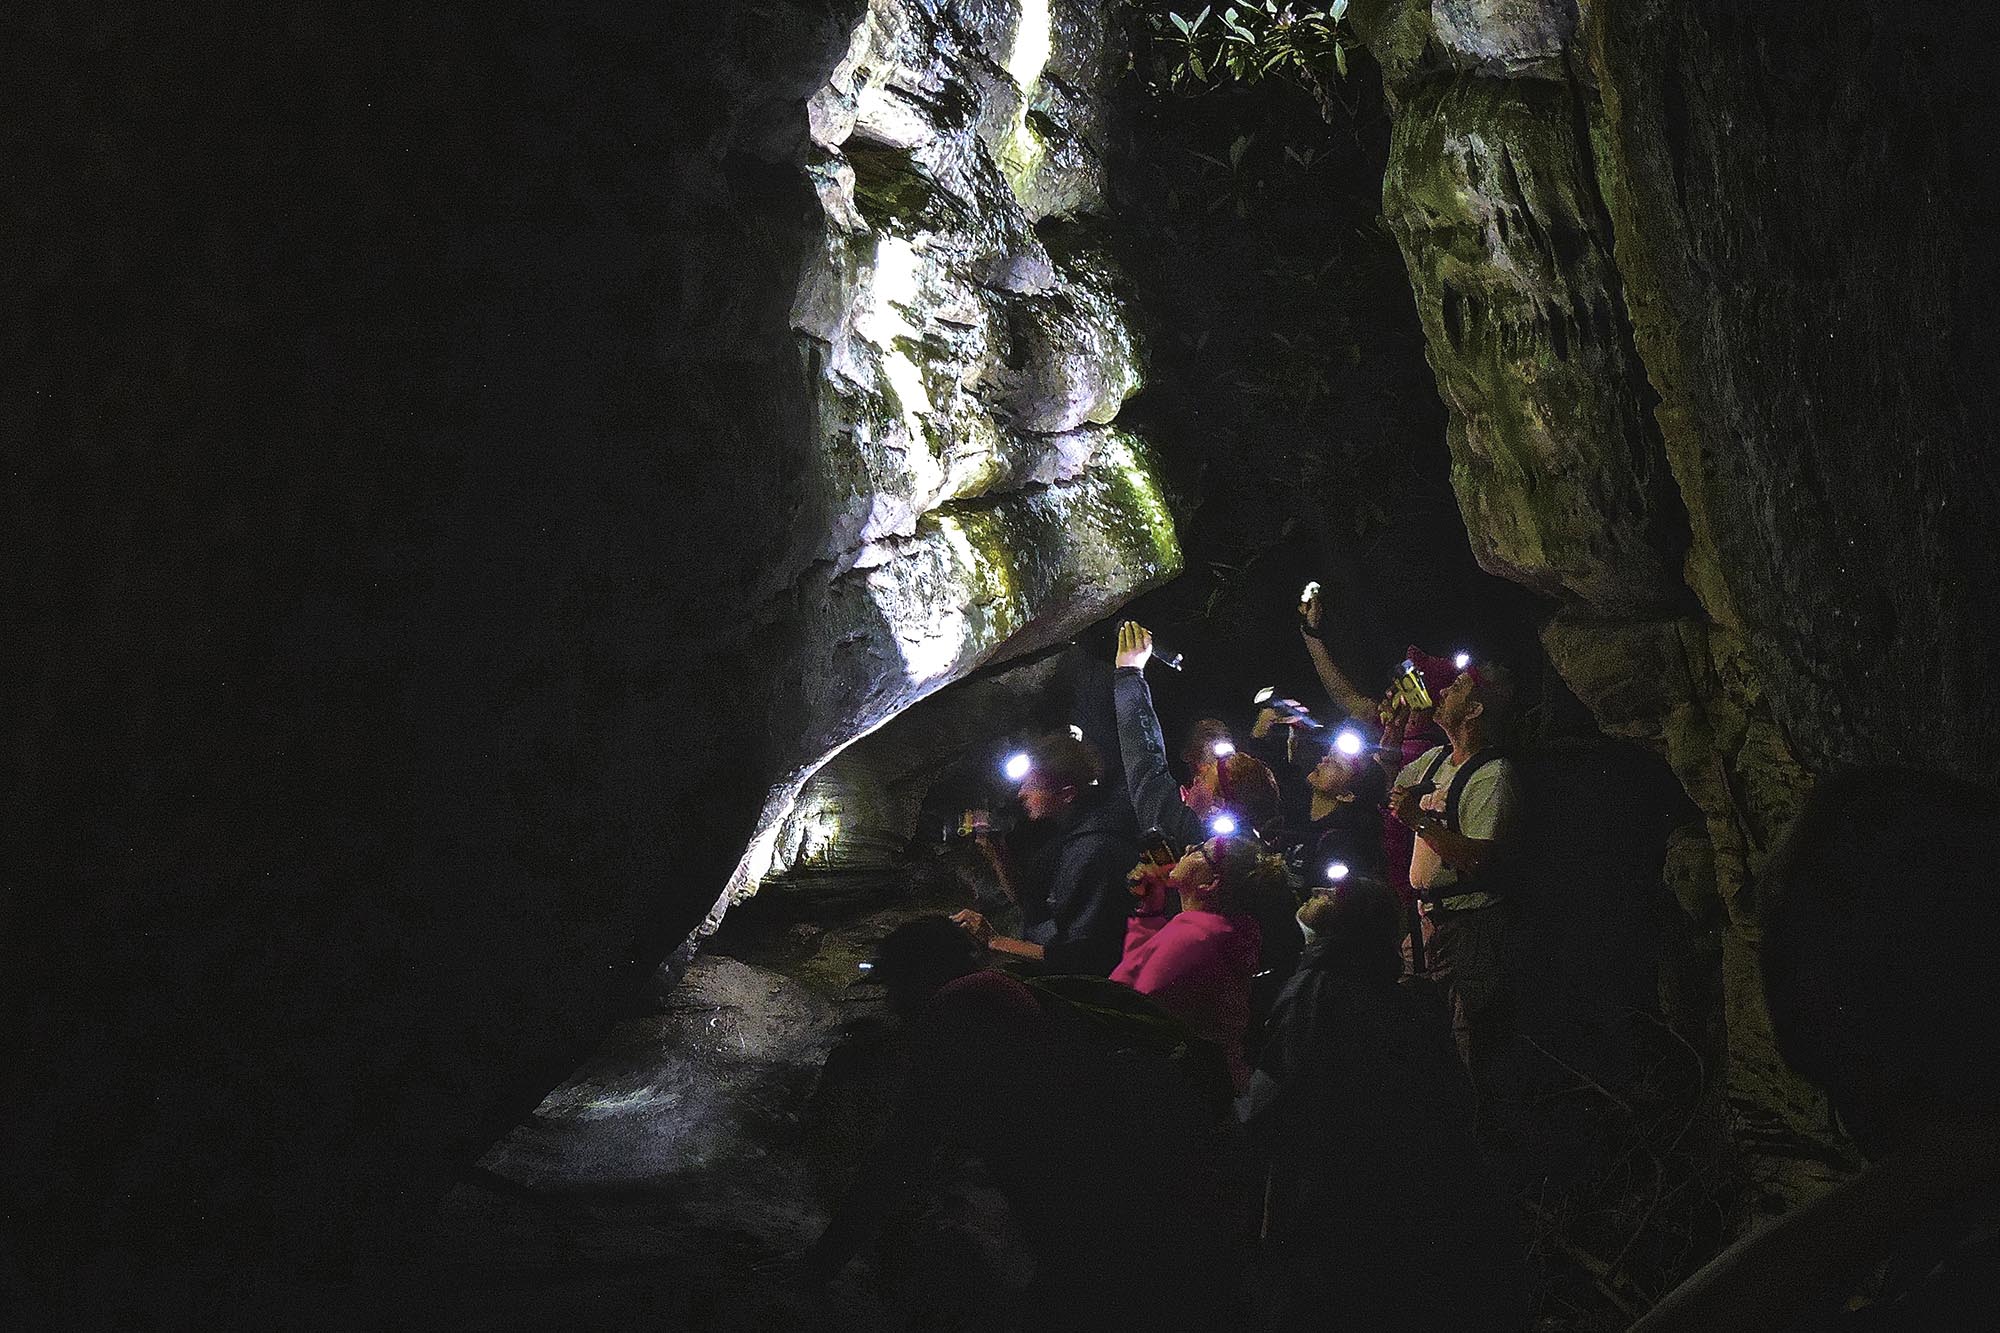 Students and Faculty exploring an Appalachian mountain cave